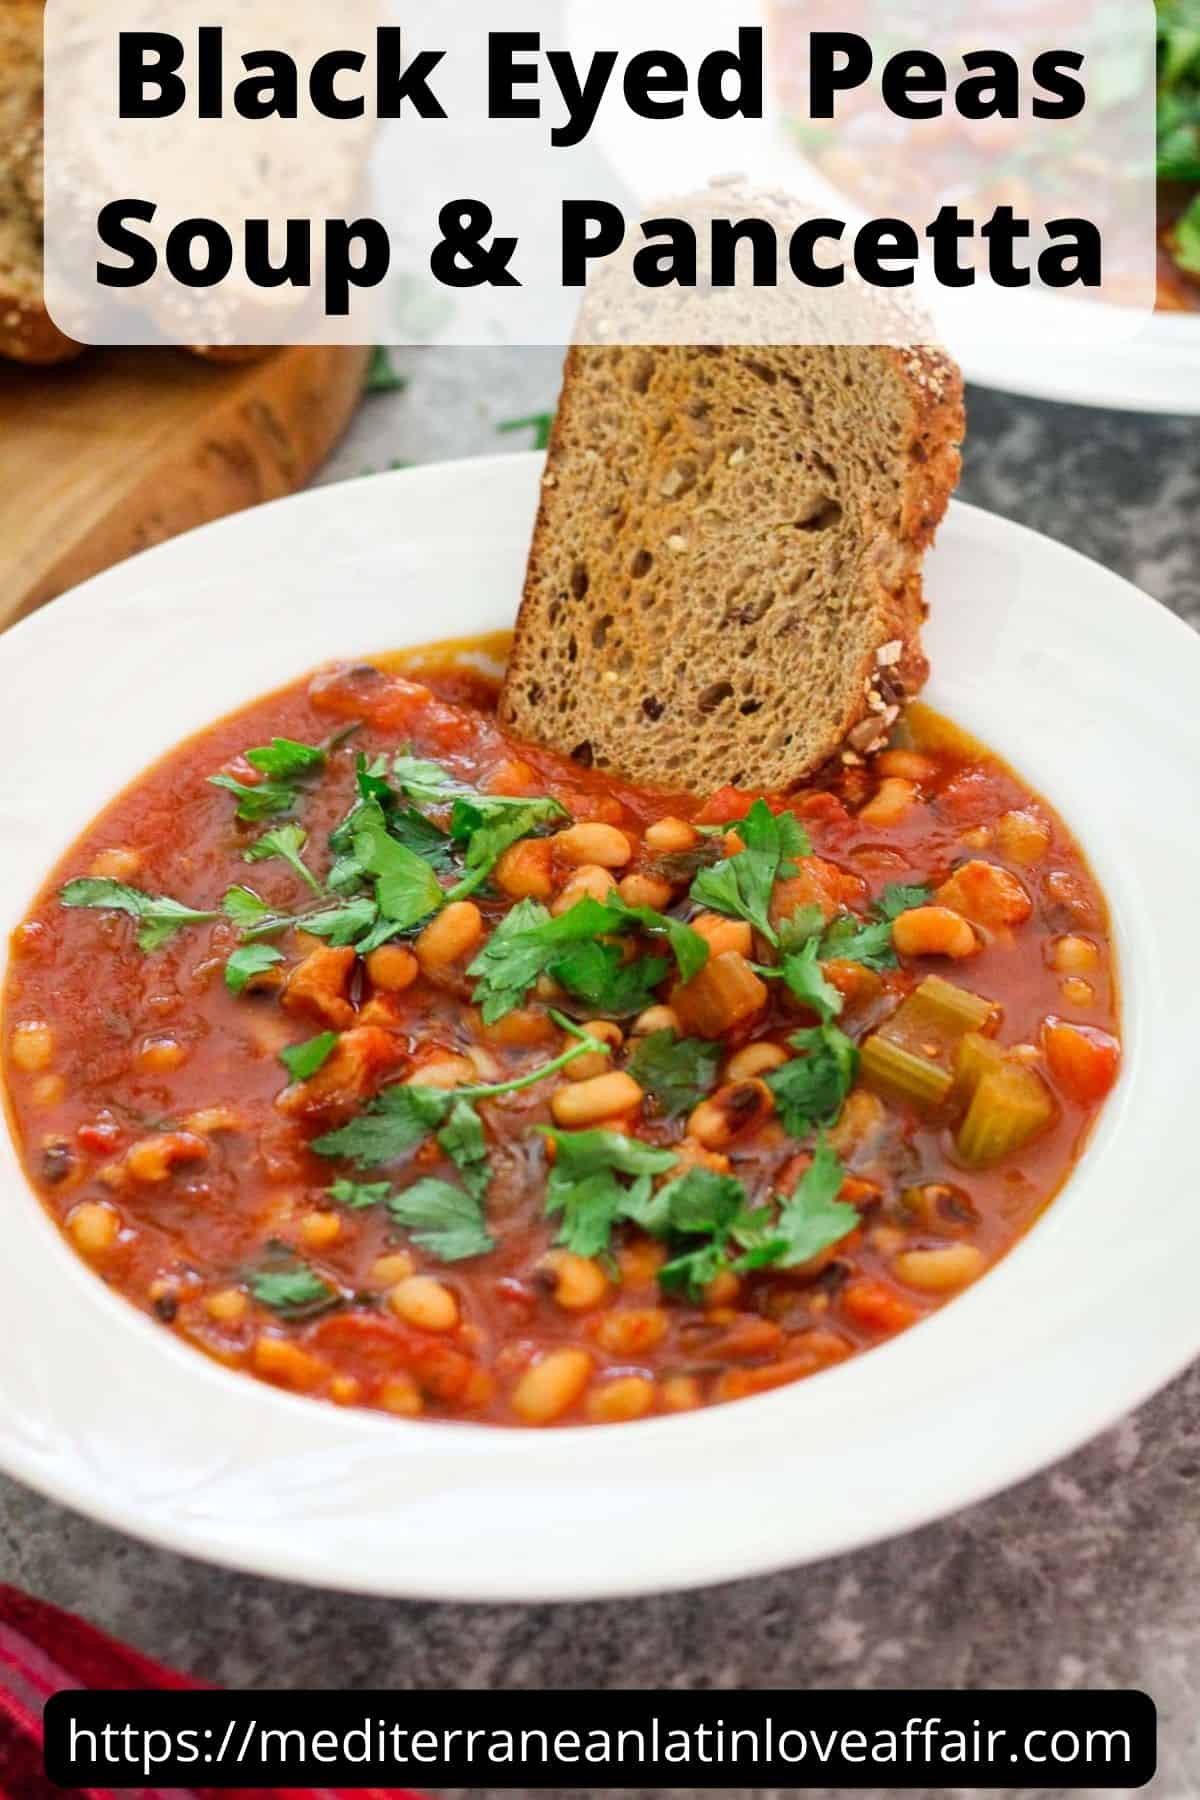 An image prepared for Pinterest, it shows a picture of the soup on a white plate, garnished with bread and fresh parsley. The picture has a title bar saying Black Eyed Peas Soup & Pancetta and at the bottom there's a website link.